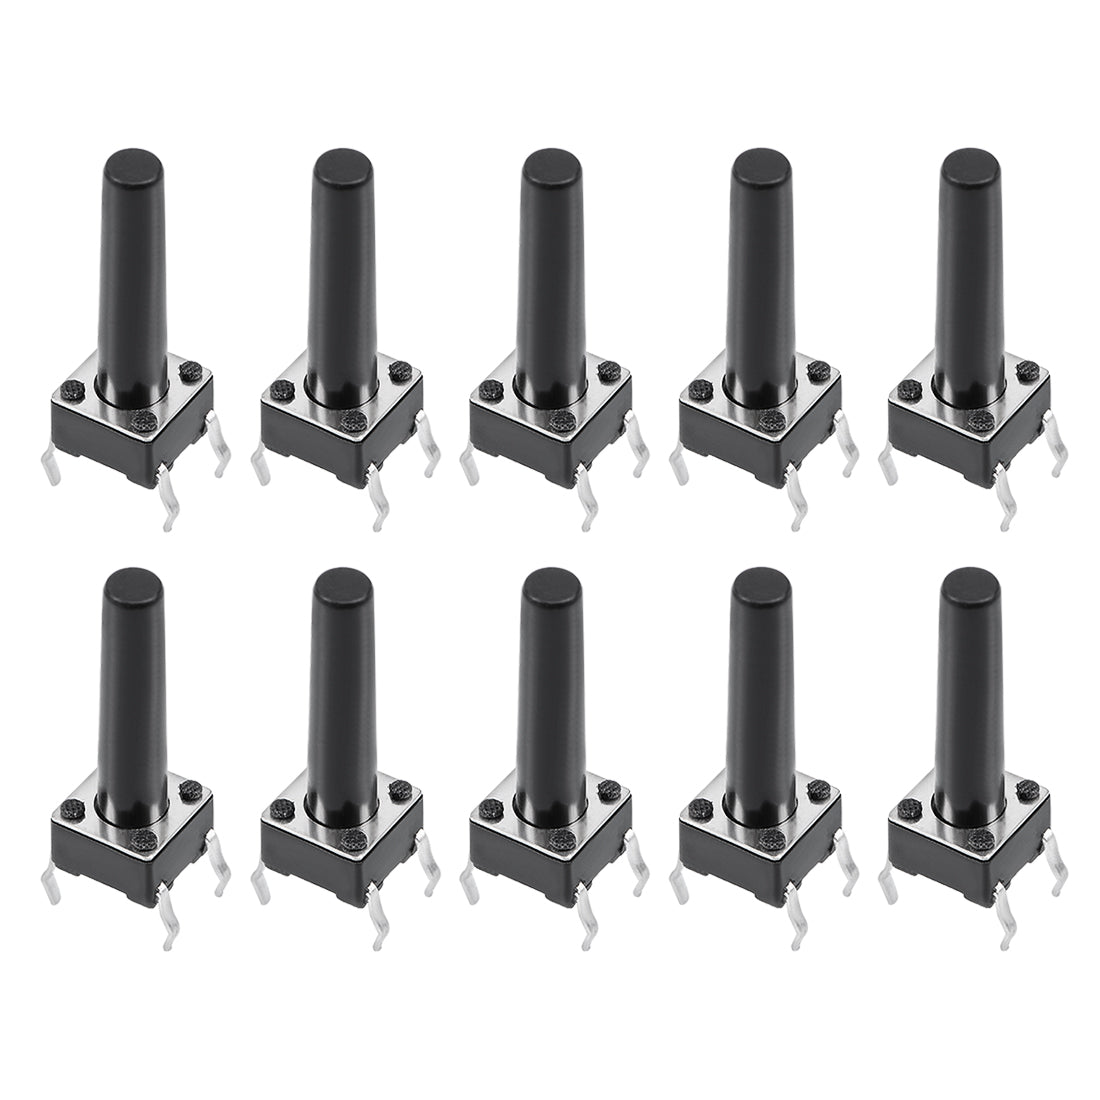 uxcell Uxcell 6x6x18mm Panel Mini/Micro/Small PCB Momentary Tactile Tact Push Button Switch DIP 10PCS